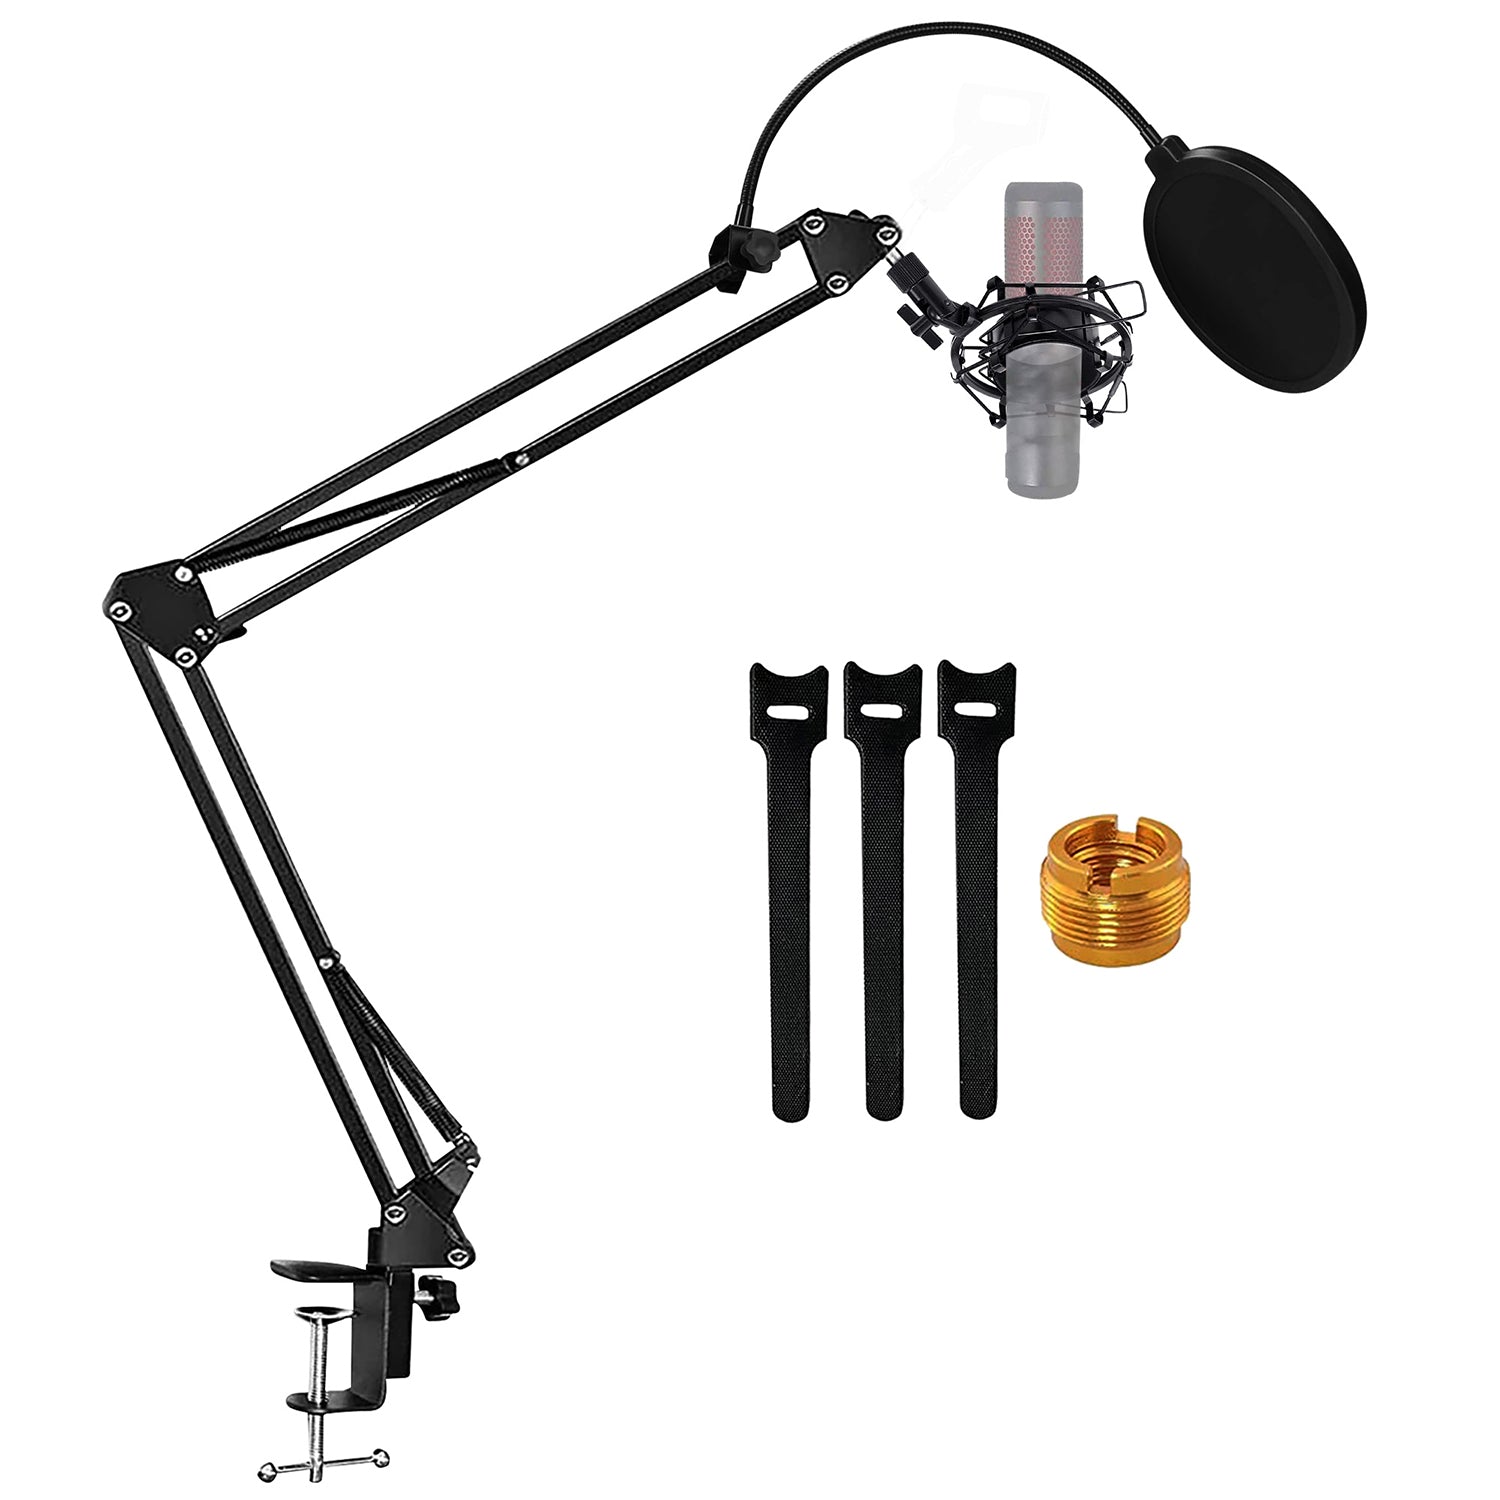 5 Core Microphone Arm Stand, Upgraded Adjustable Suspension Boom Scissor Arm Mic Stand 42 inch with Pop Filter